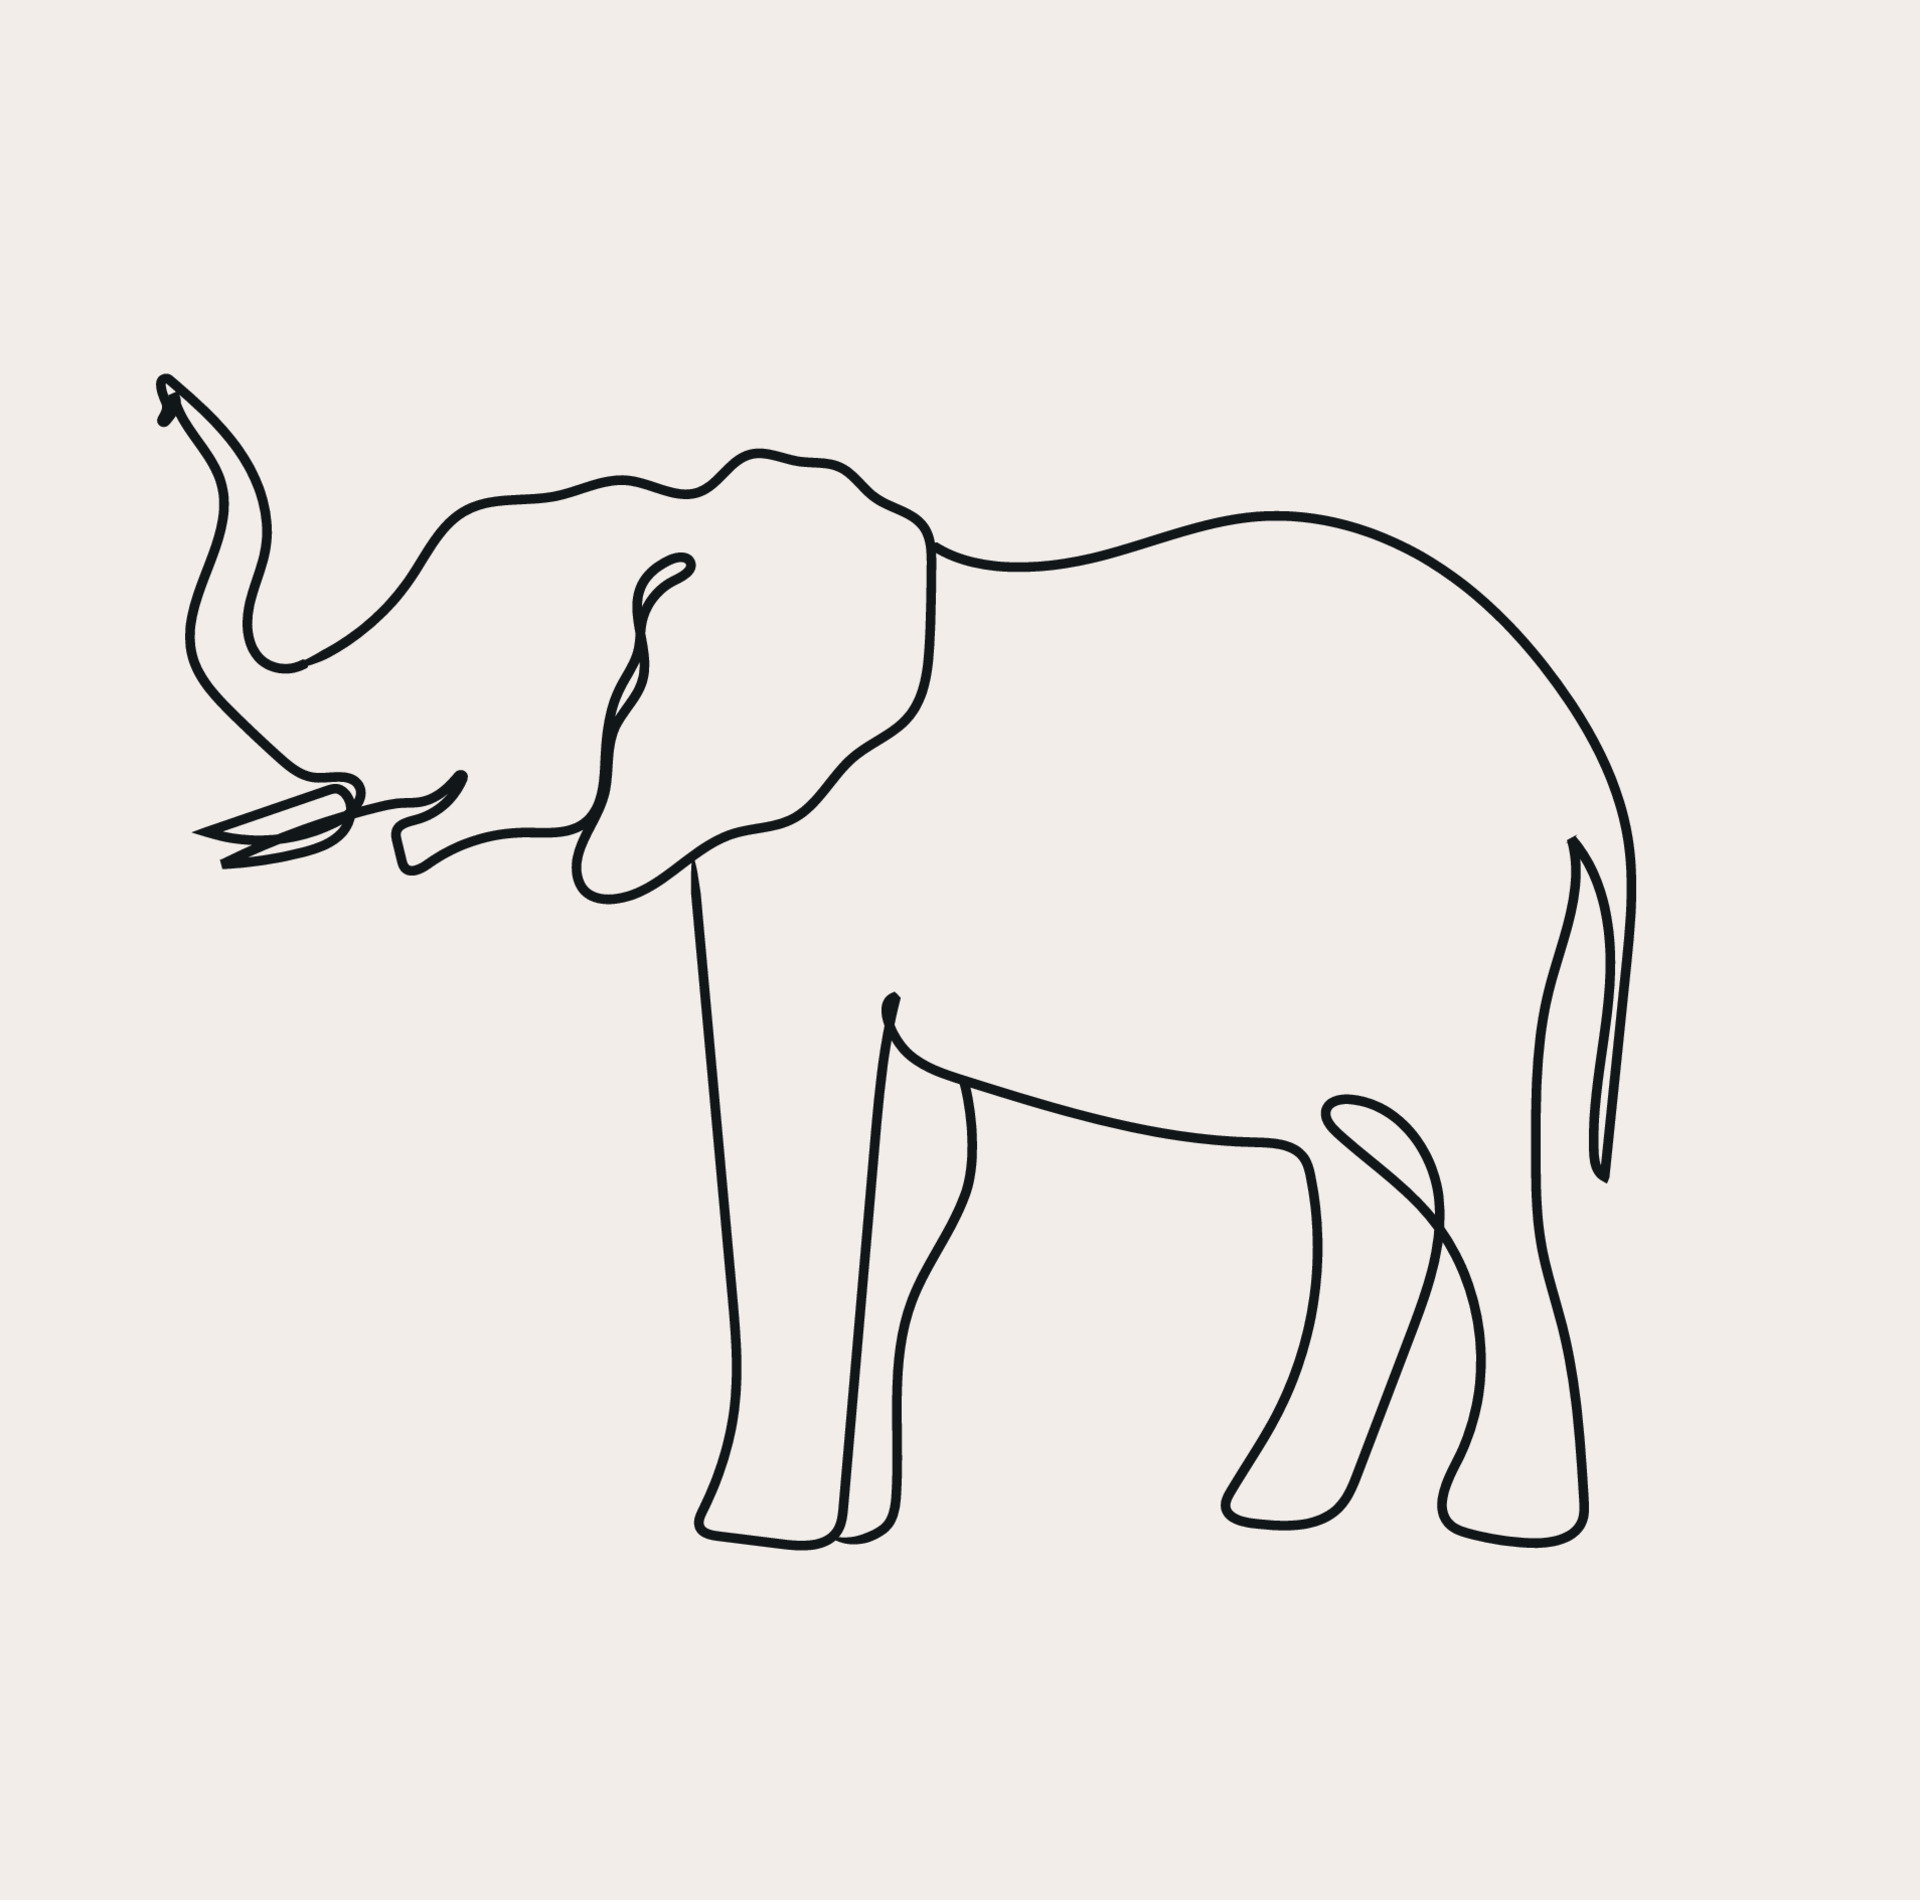 How to Draw an Elephant Head - Easy Drawing Art